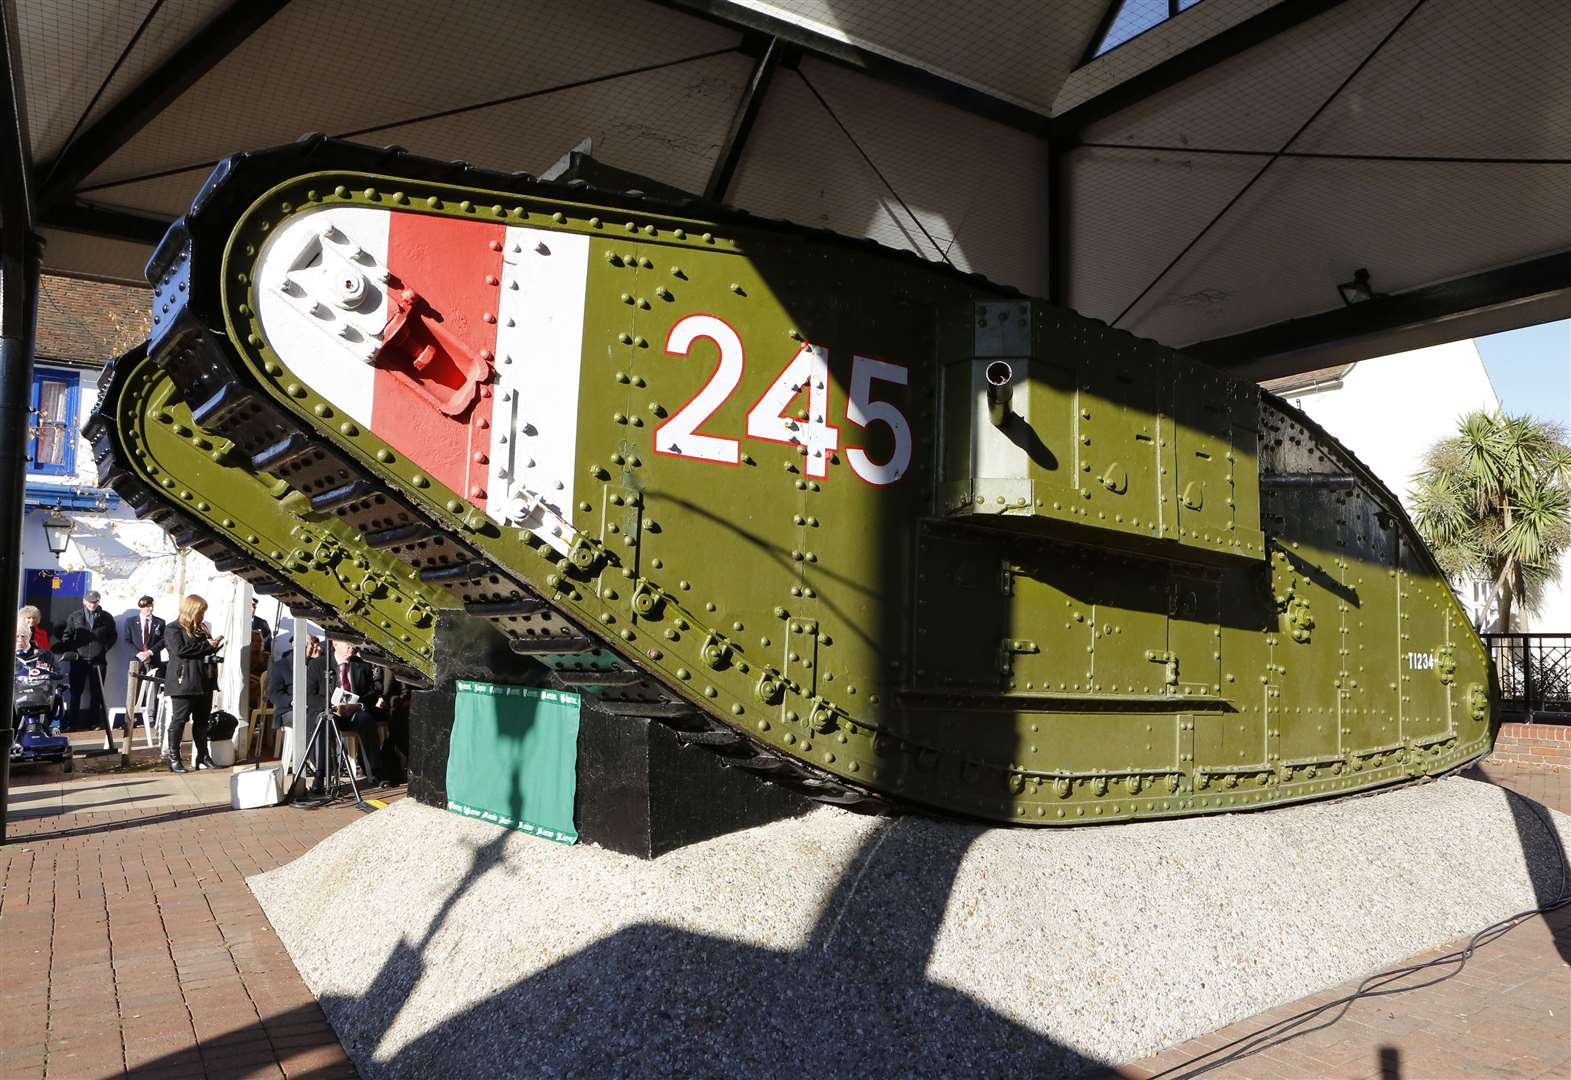 Historic tank is at risk of collapse